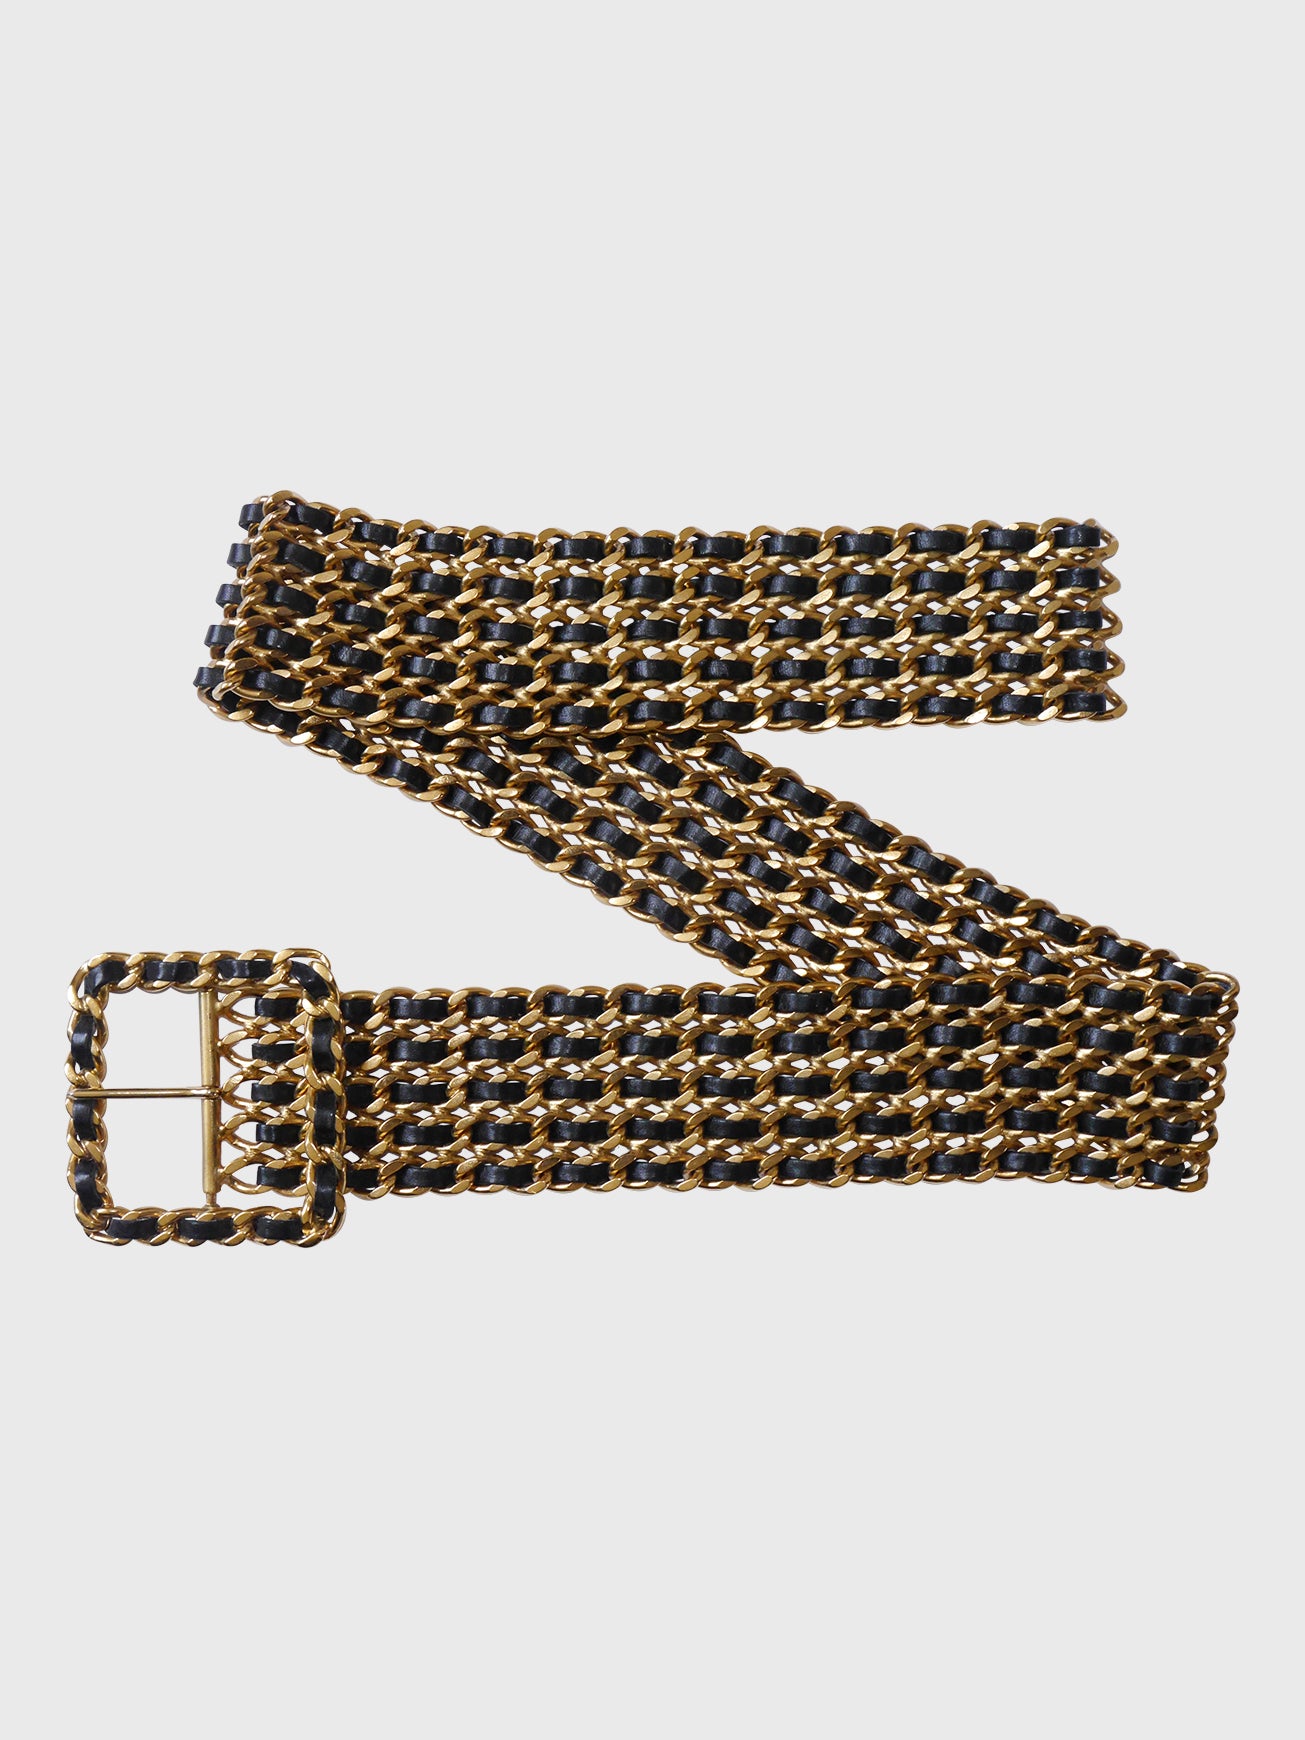 CHANEL Spring 1993 Multi-Strand Chain Belt As Modeled By Kate Moss